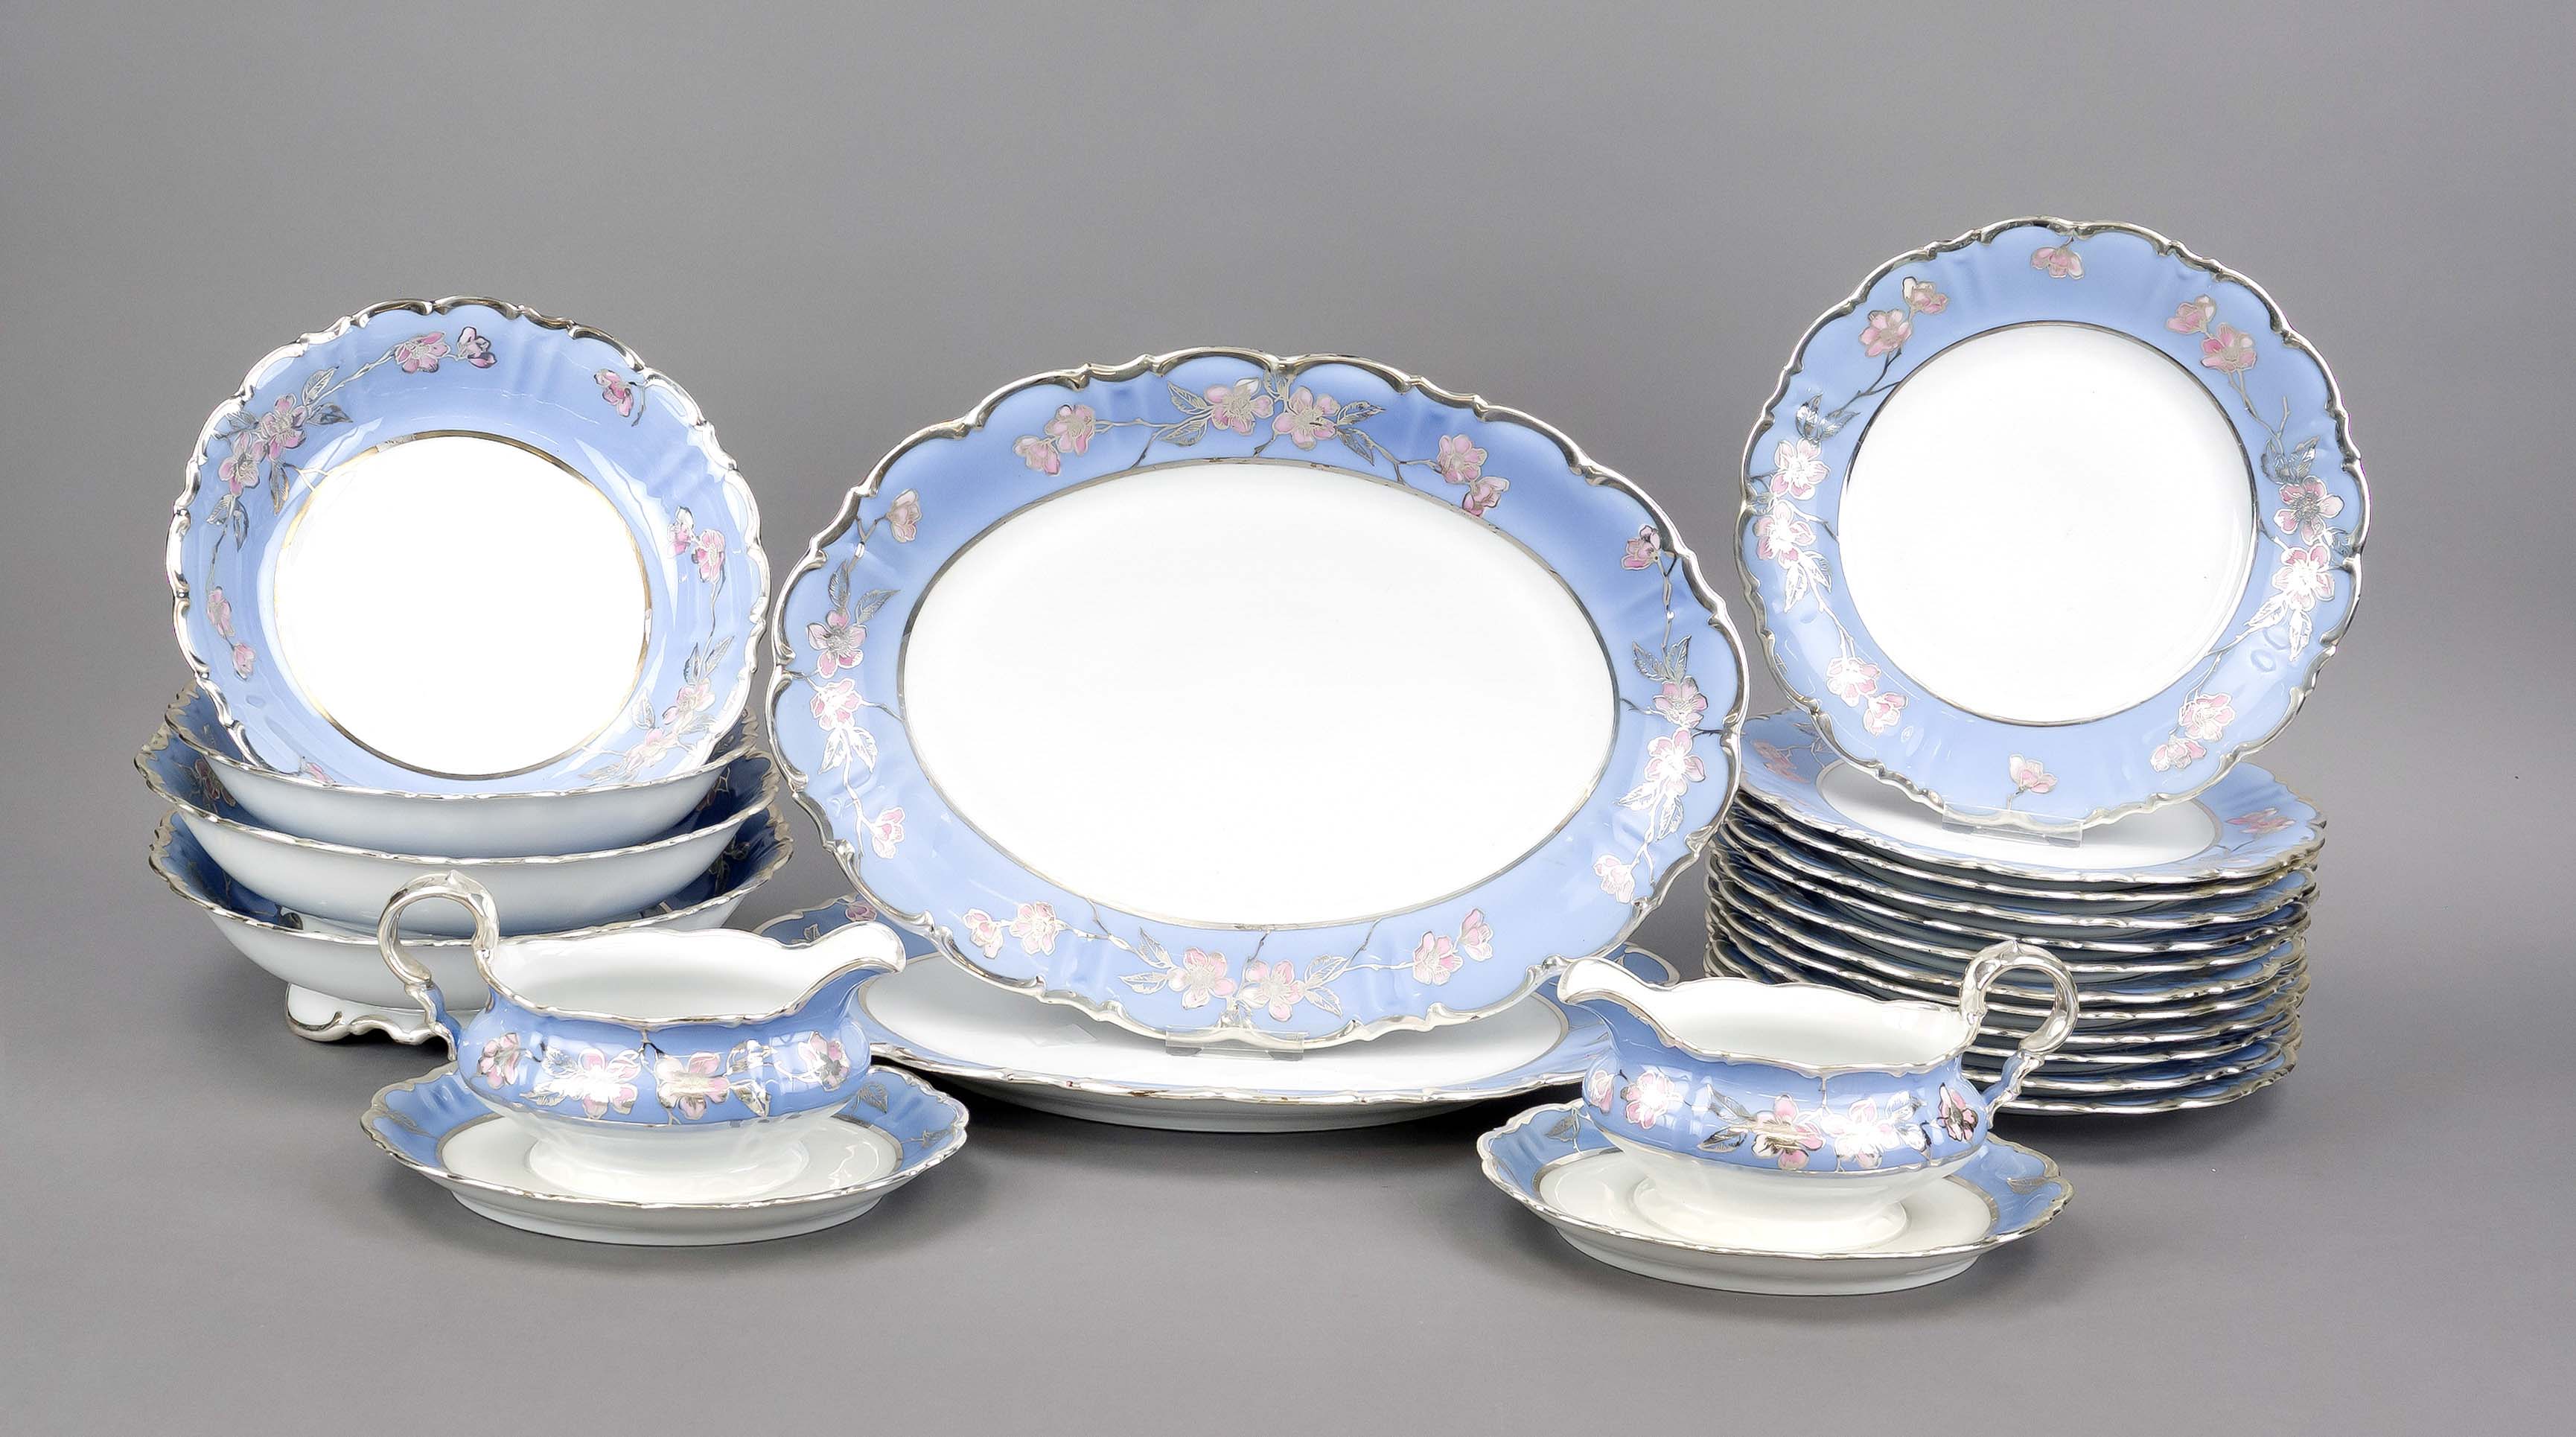 Dining service for 12 persons, 32-piece, Hutschenreuther Hohenberg, mark after 1949, Trianon